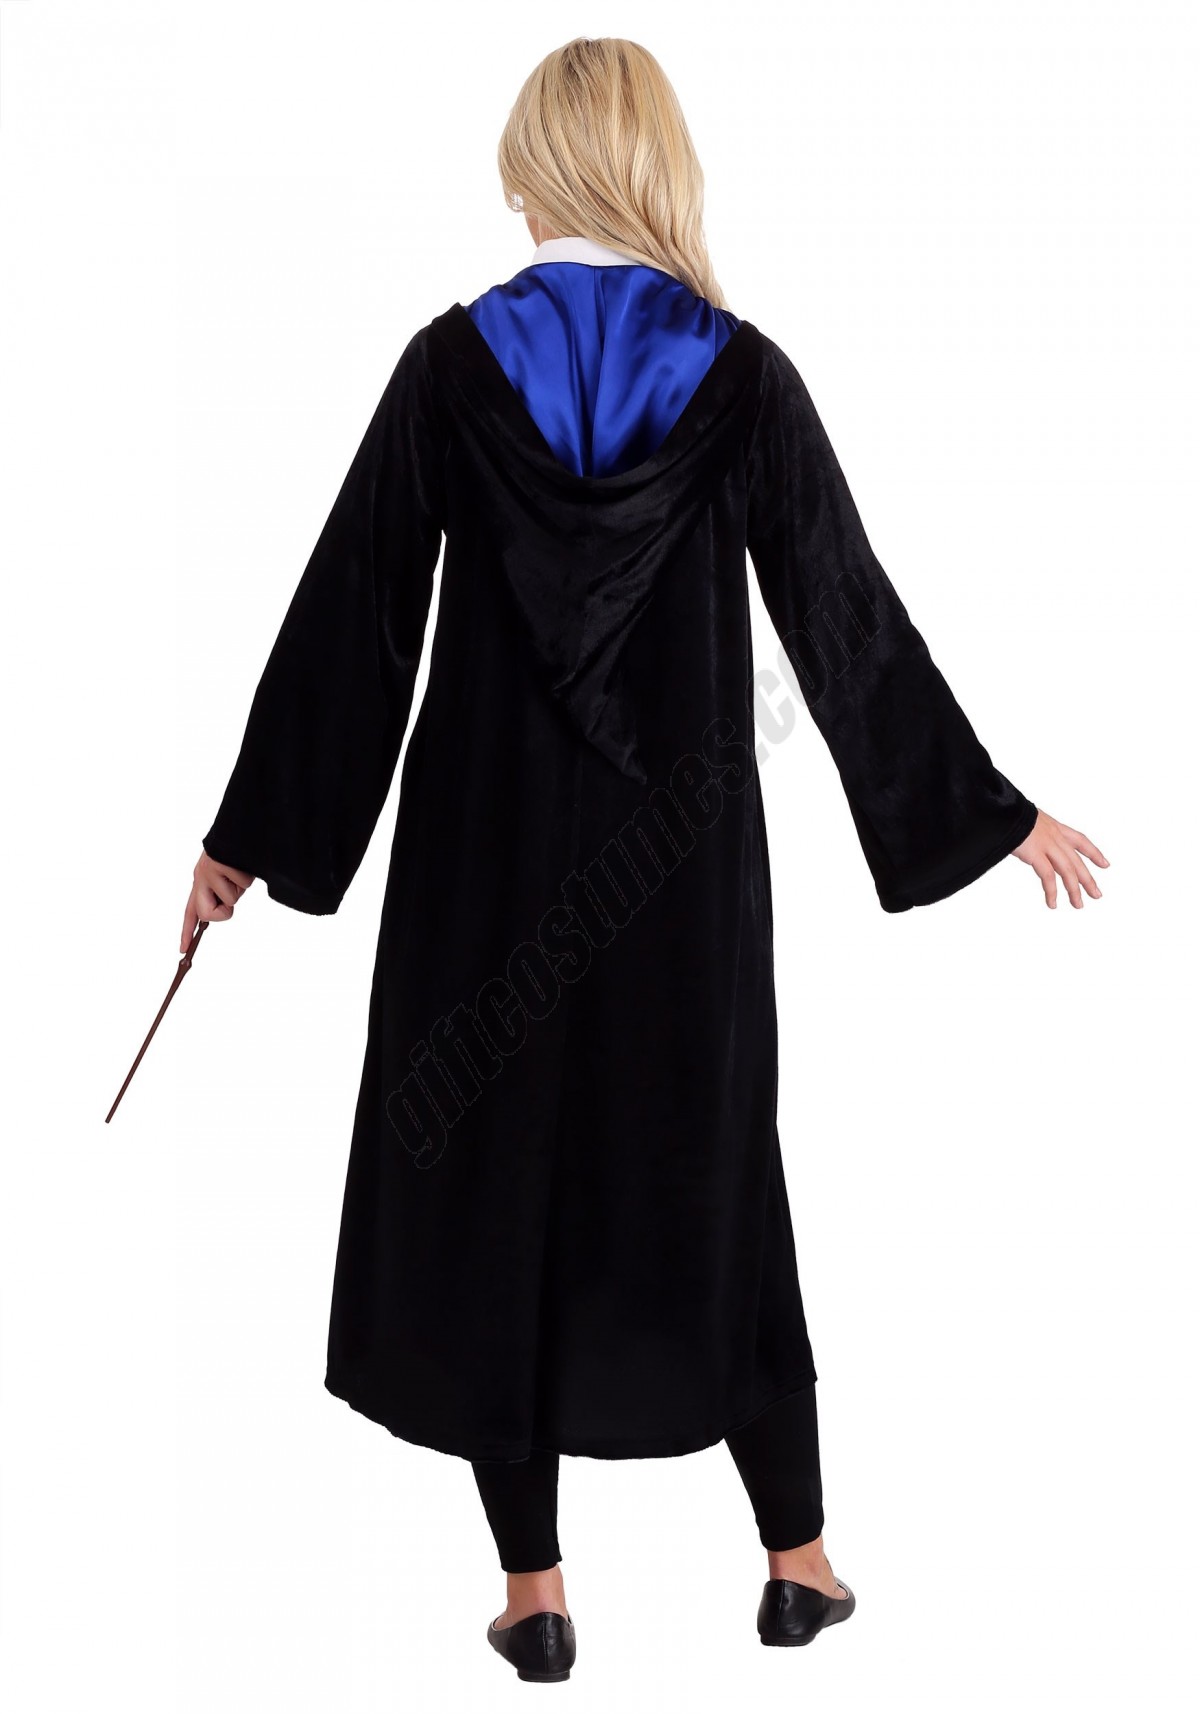 Deluxe Harry Potter Adult Plus Size Ravenclaw Robe Costume Promotions - -1